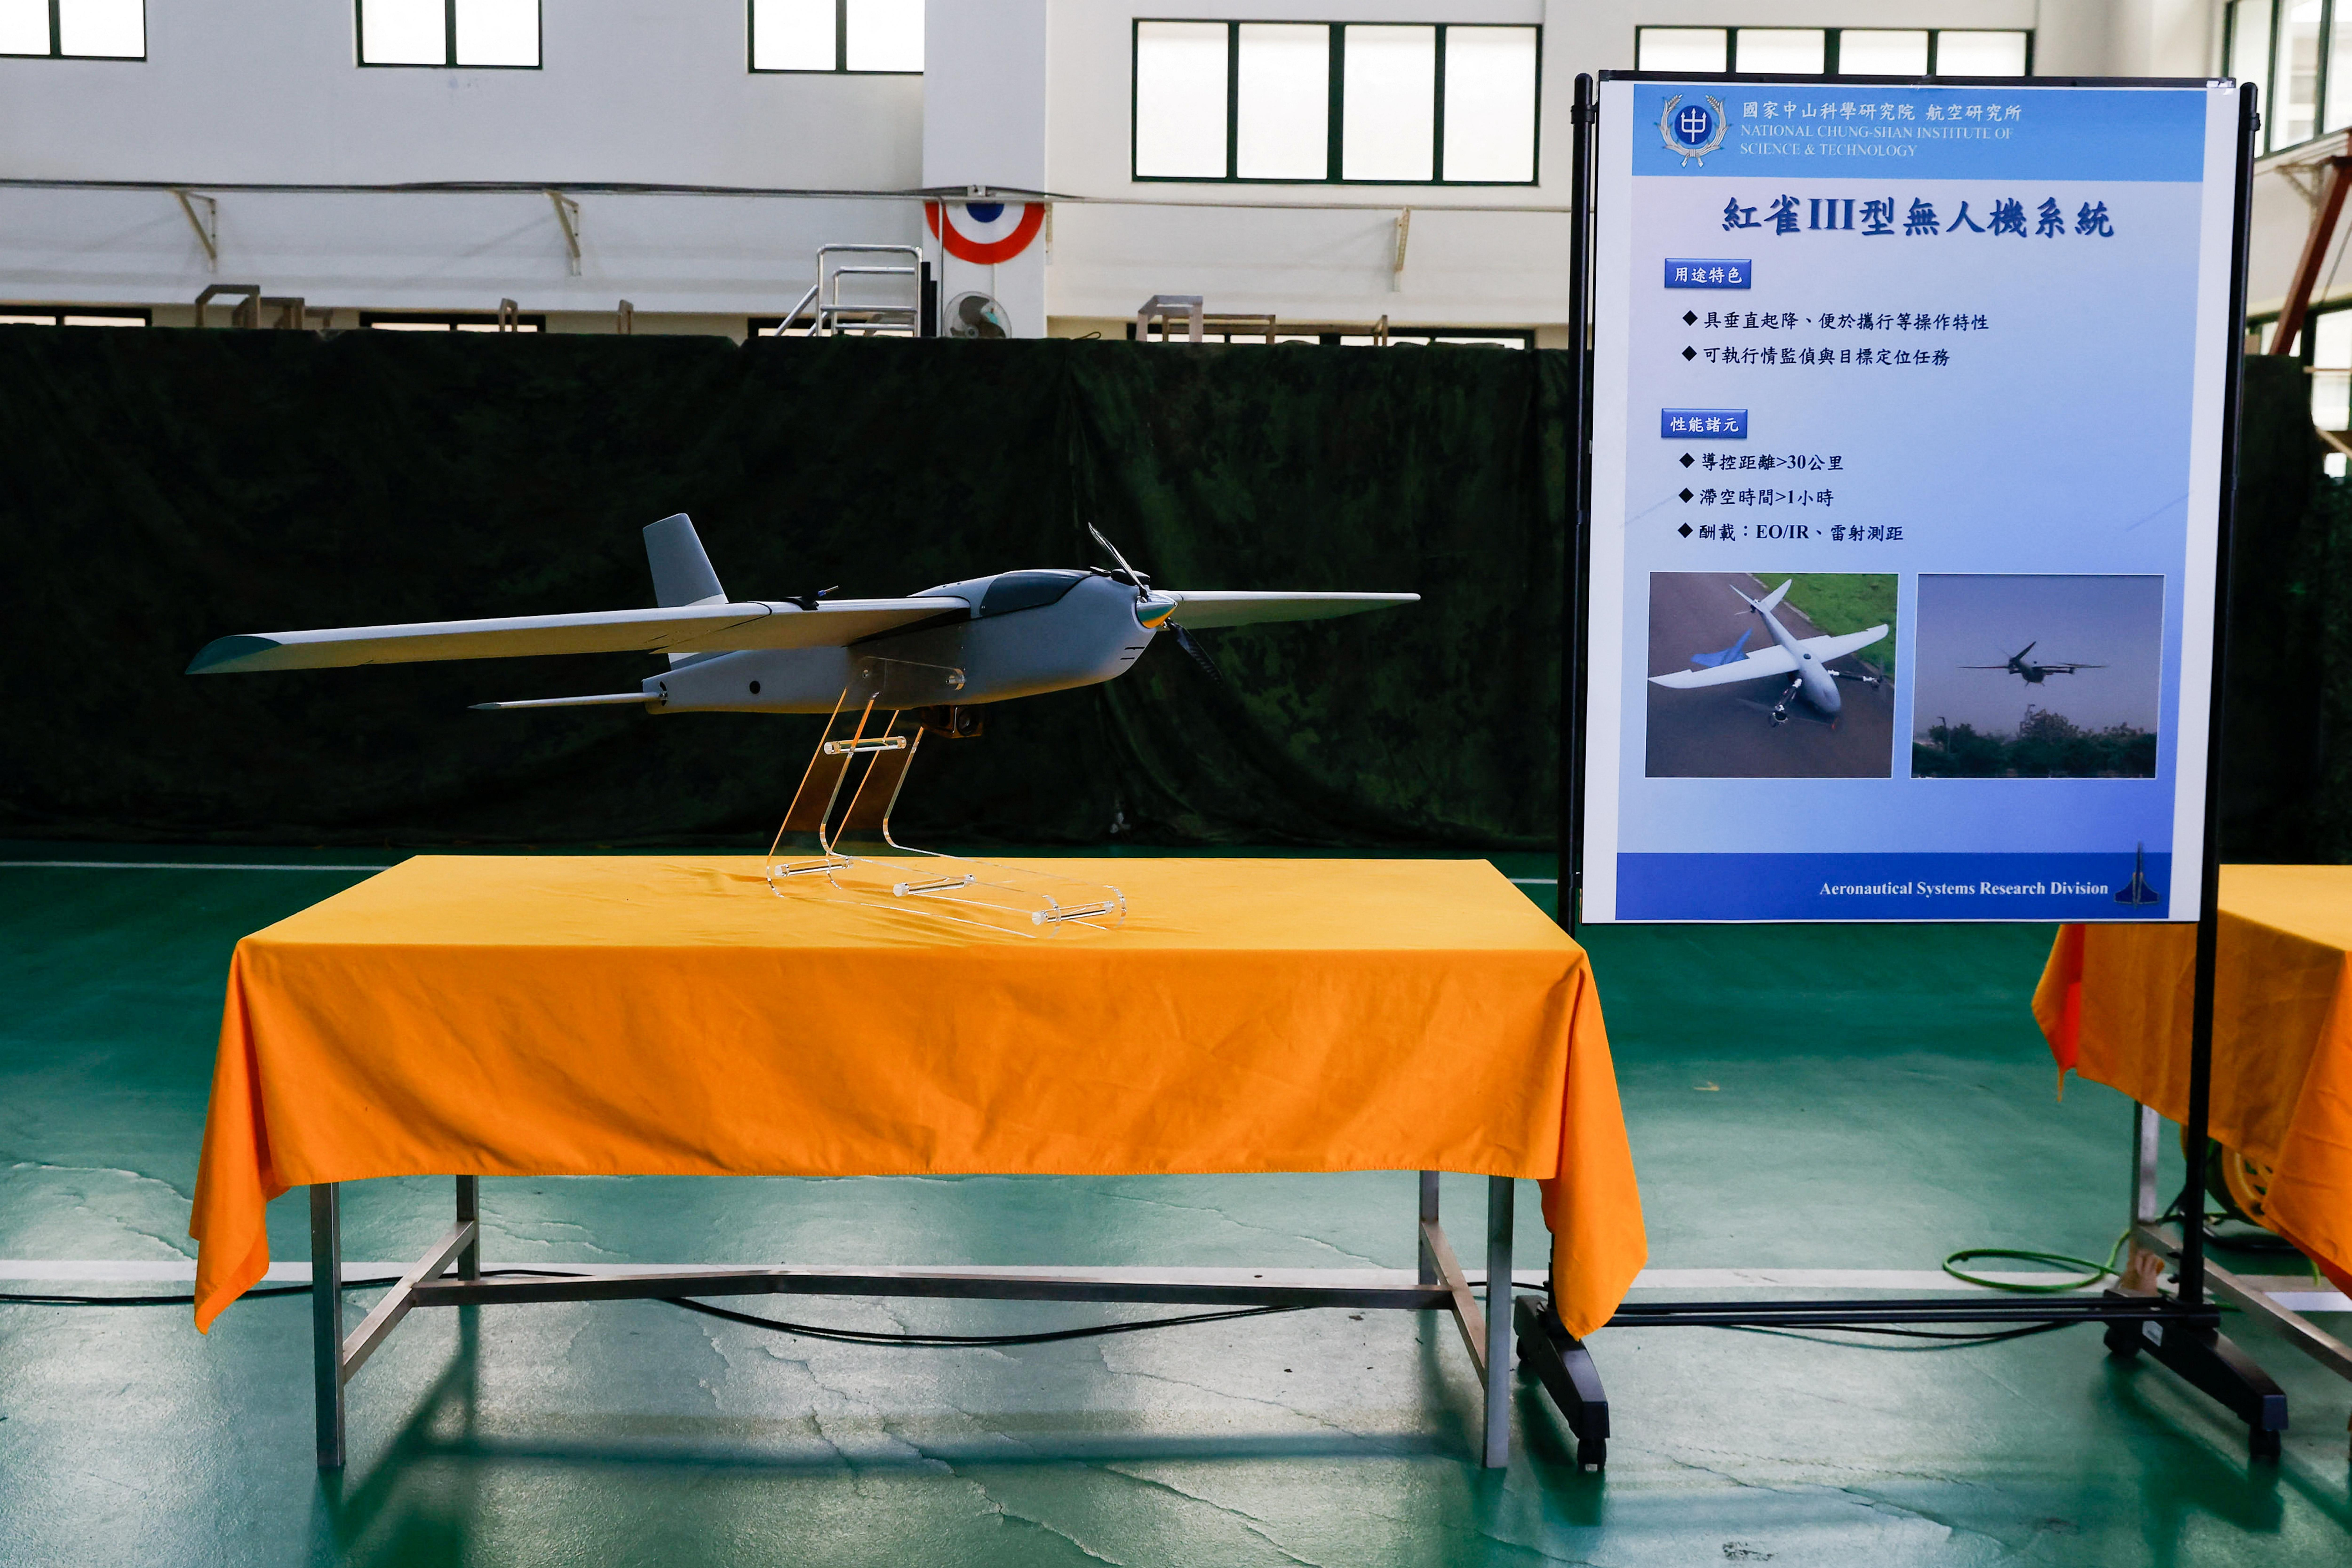 Taiwan's Defence Ministry showcases its domestically developed drones to the press in Taichung